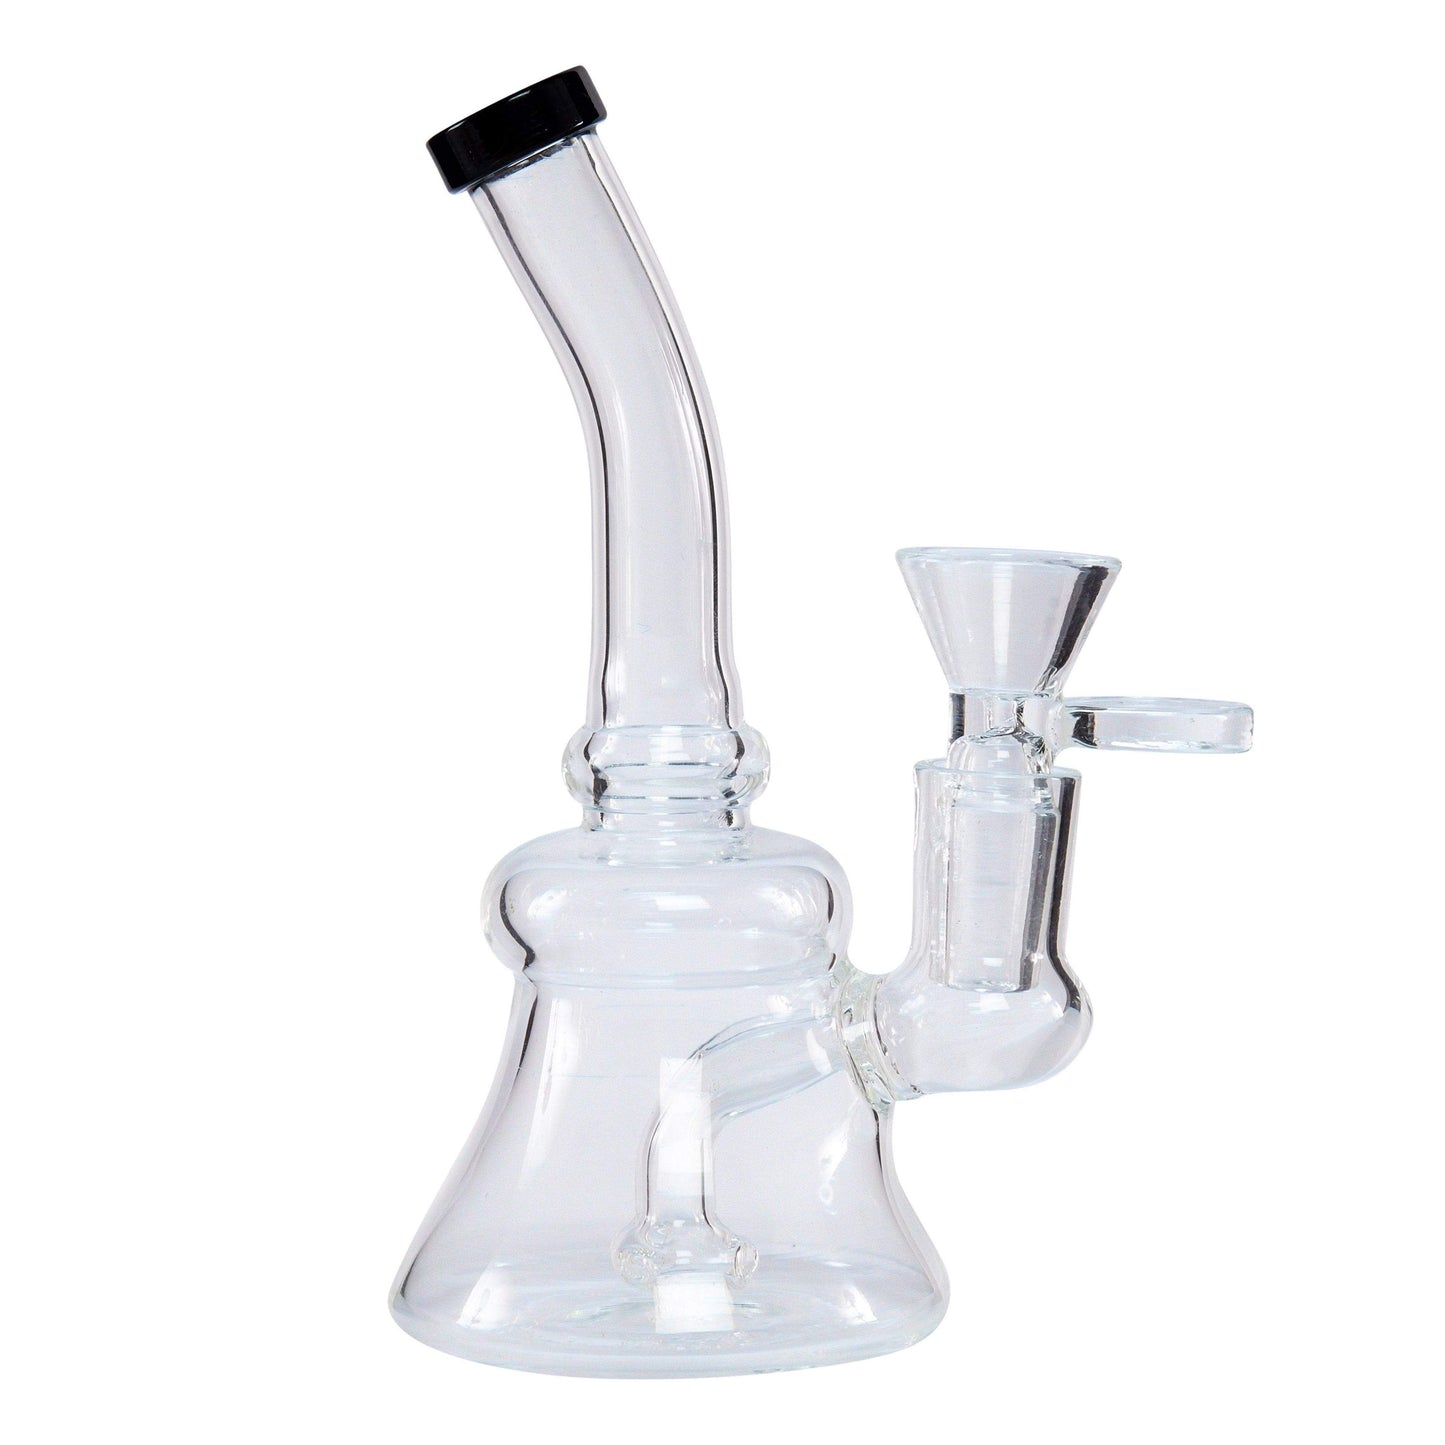 5.5-inch mini bong smoking device made of glass with black tip and sturdy base